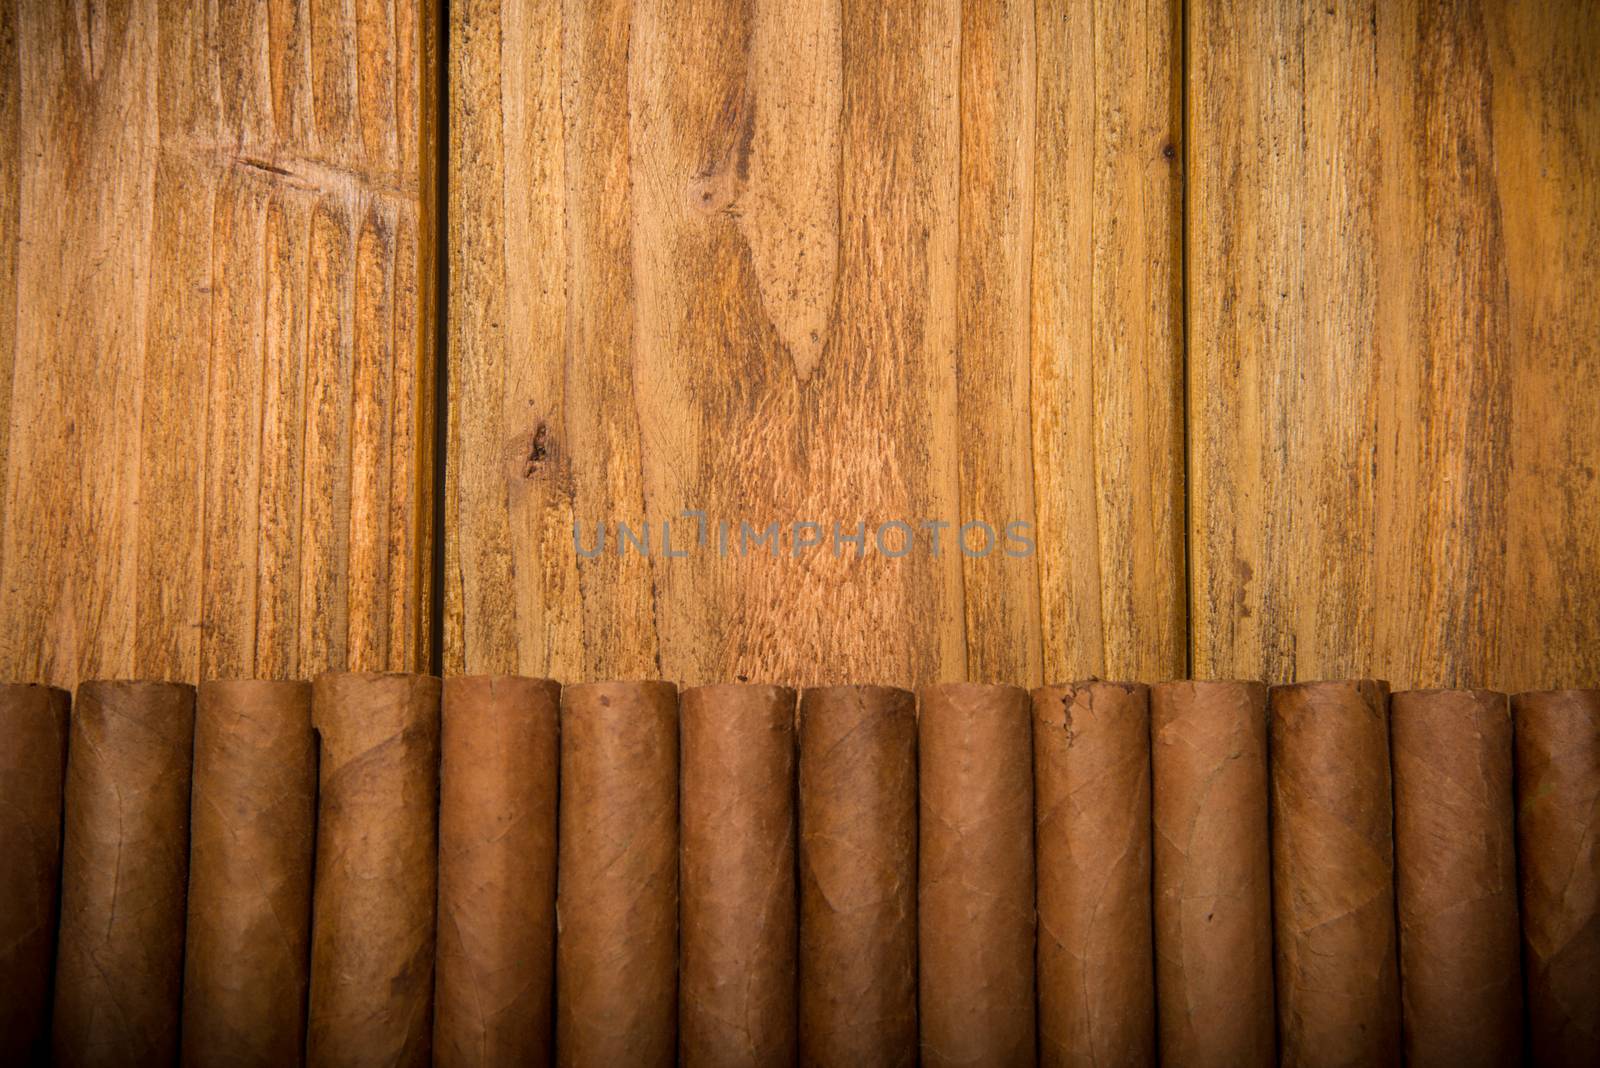 Cuban cigars on rustic wooden table in line on the edge of background